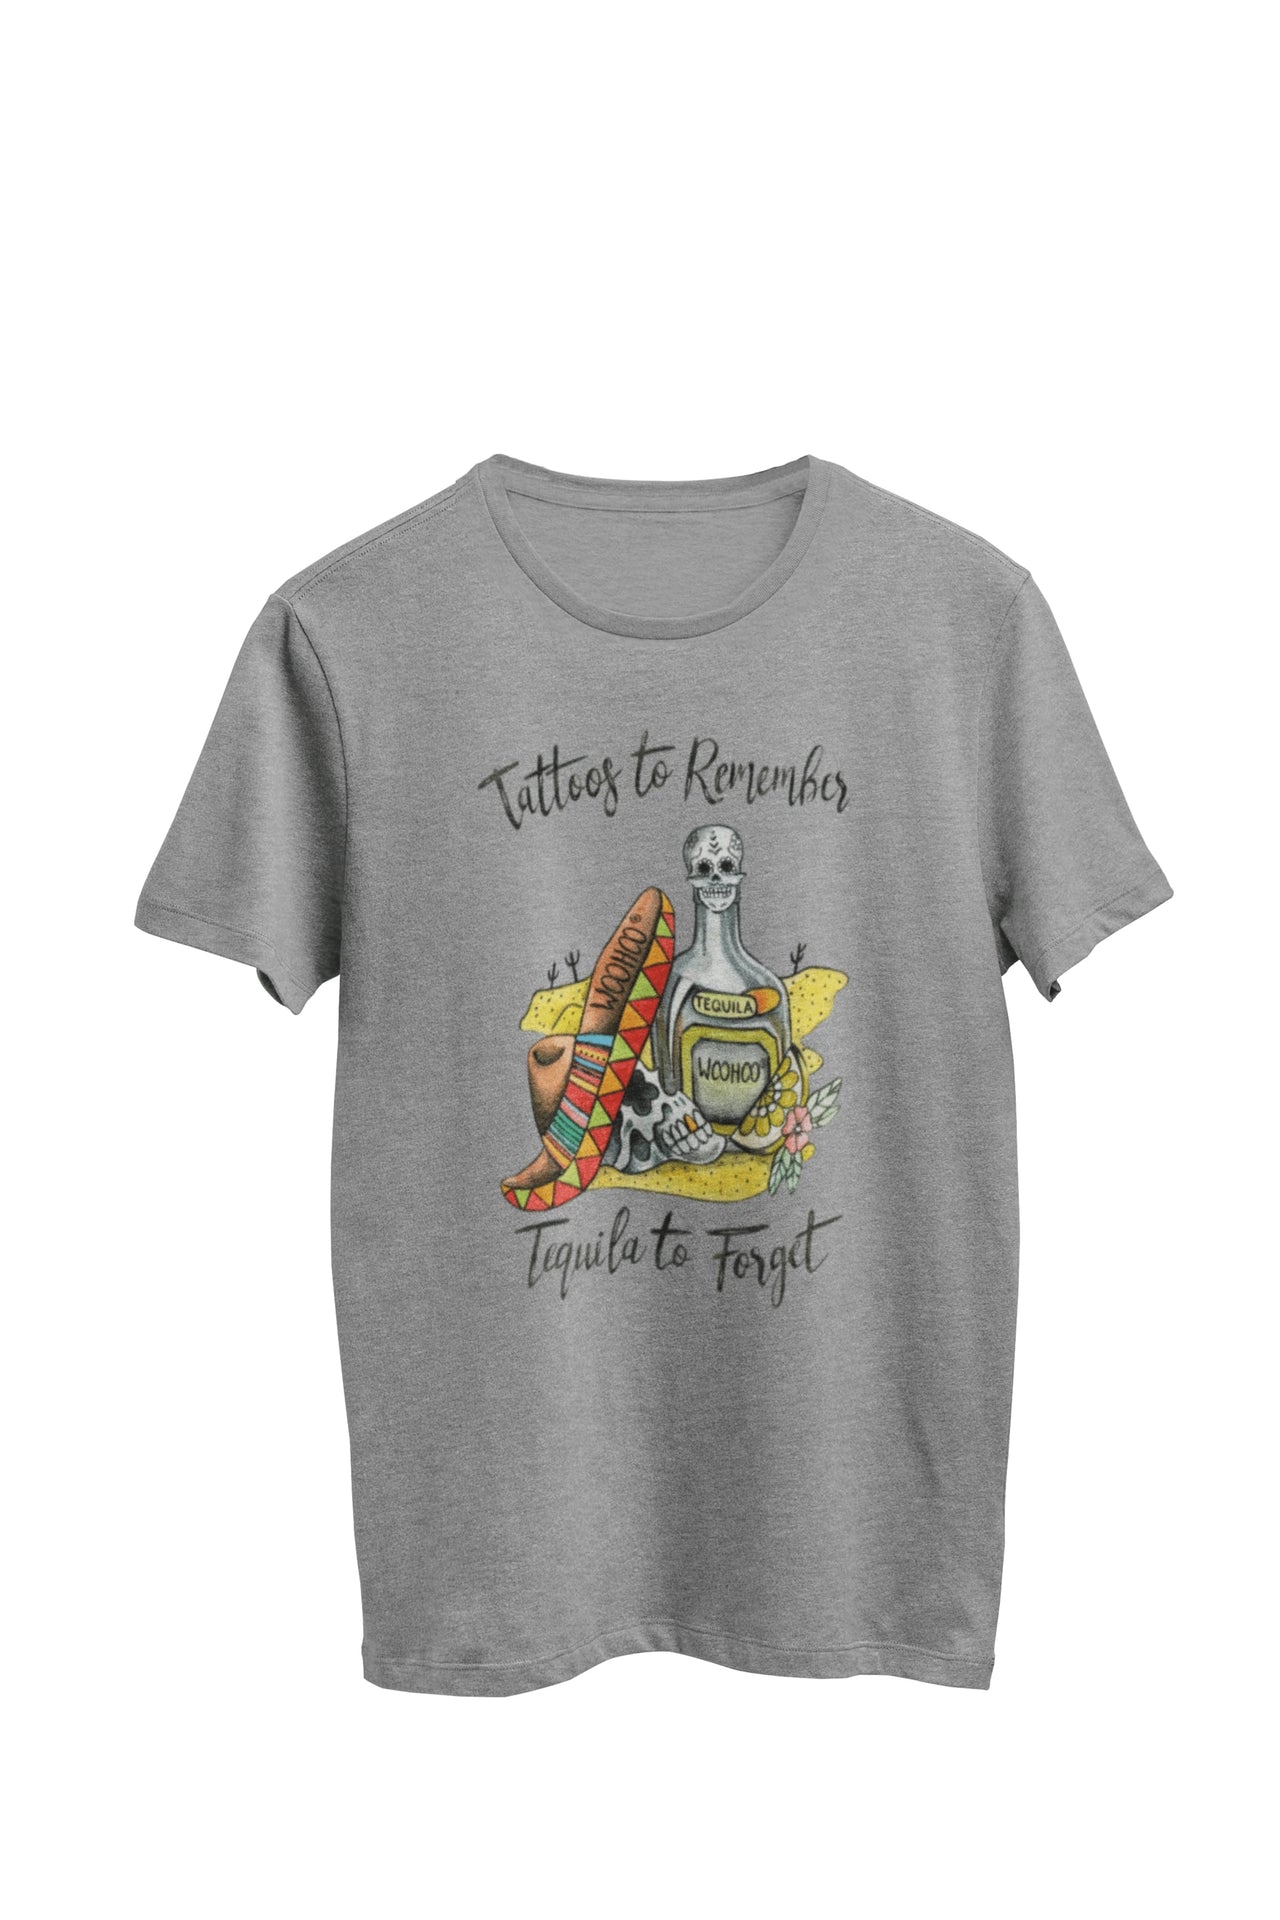  Gray Heather Unisex T-shirt with text 'Tattoos to Remember, Tequila to Forget' featuring a tequila bottle with a skull and sombrero. Created by WooHoo Apparel.